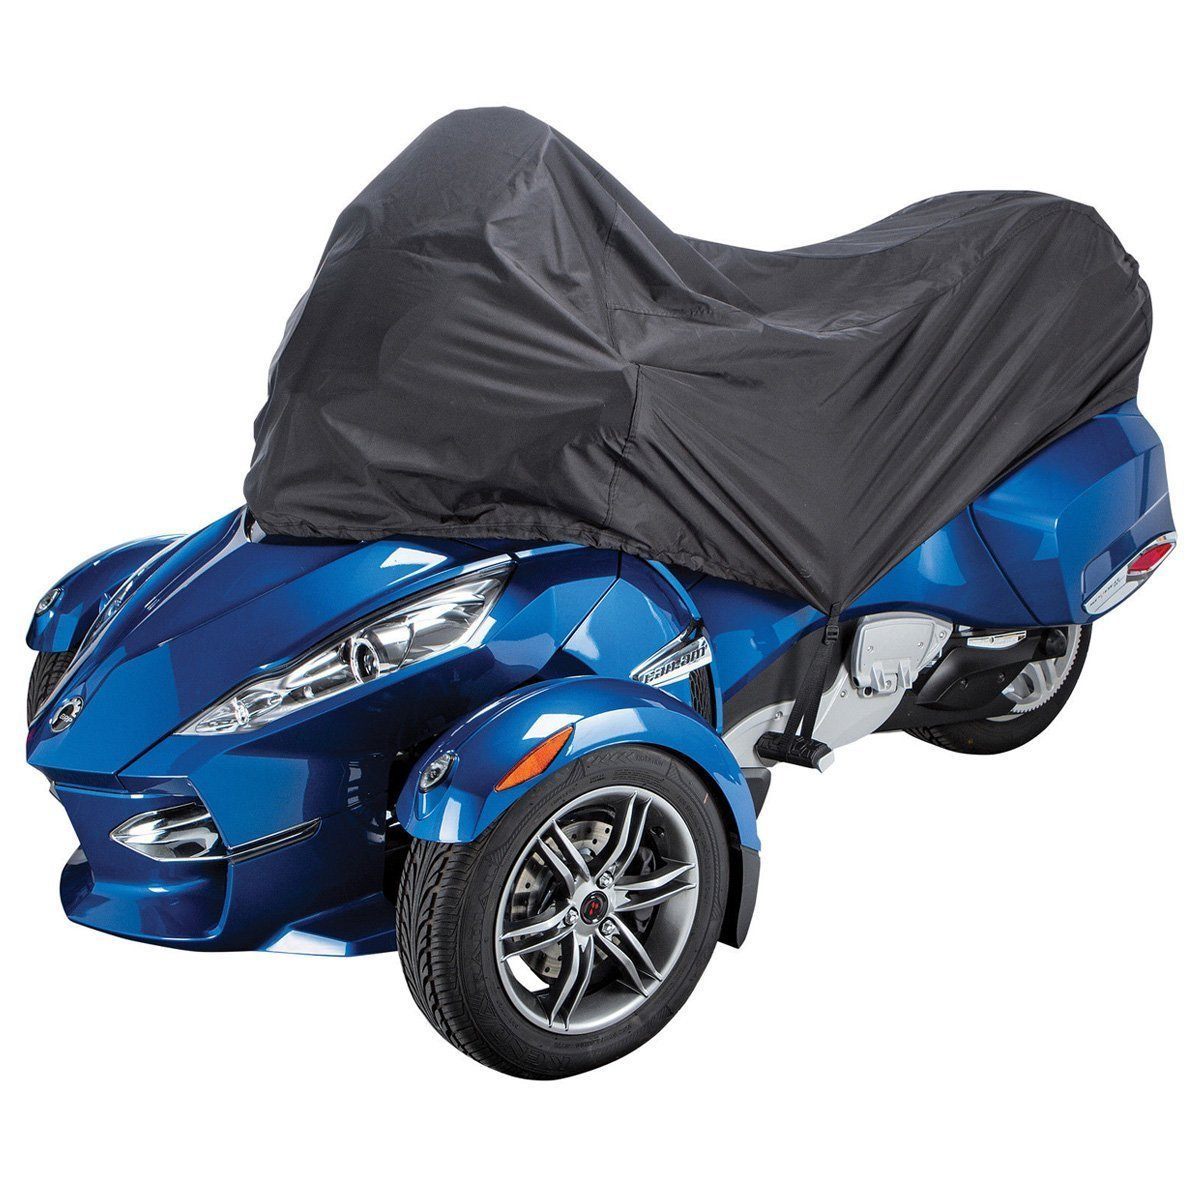 Tourmaster 'Select' Can-Am Spyder RT UV Elite Half Cover